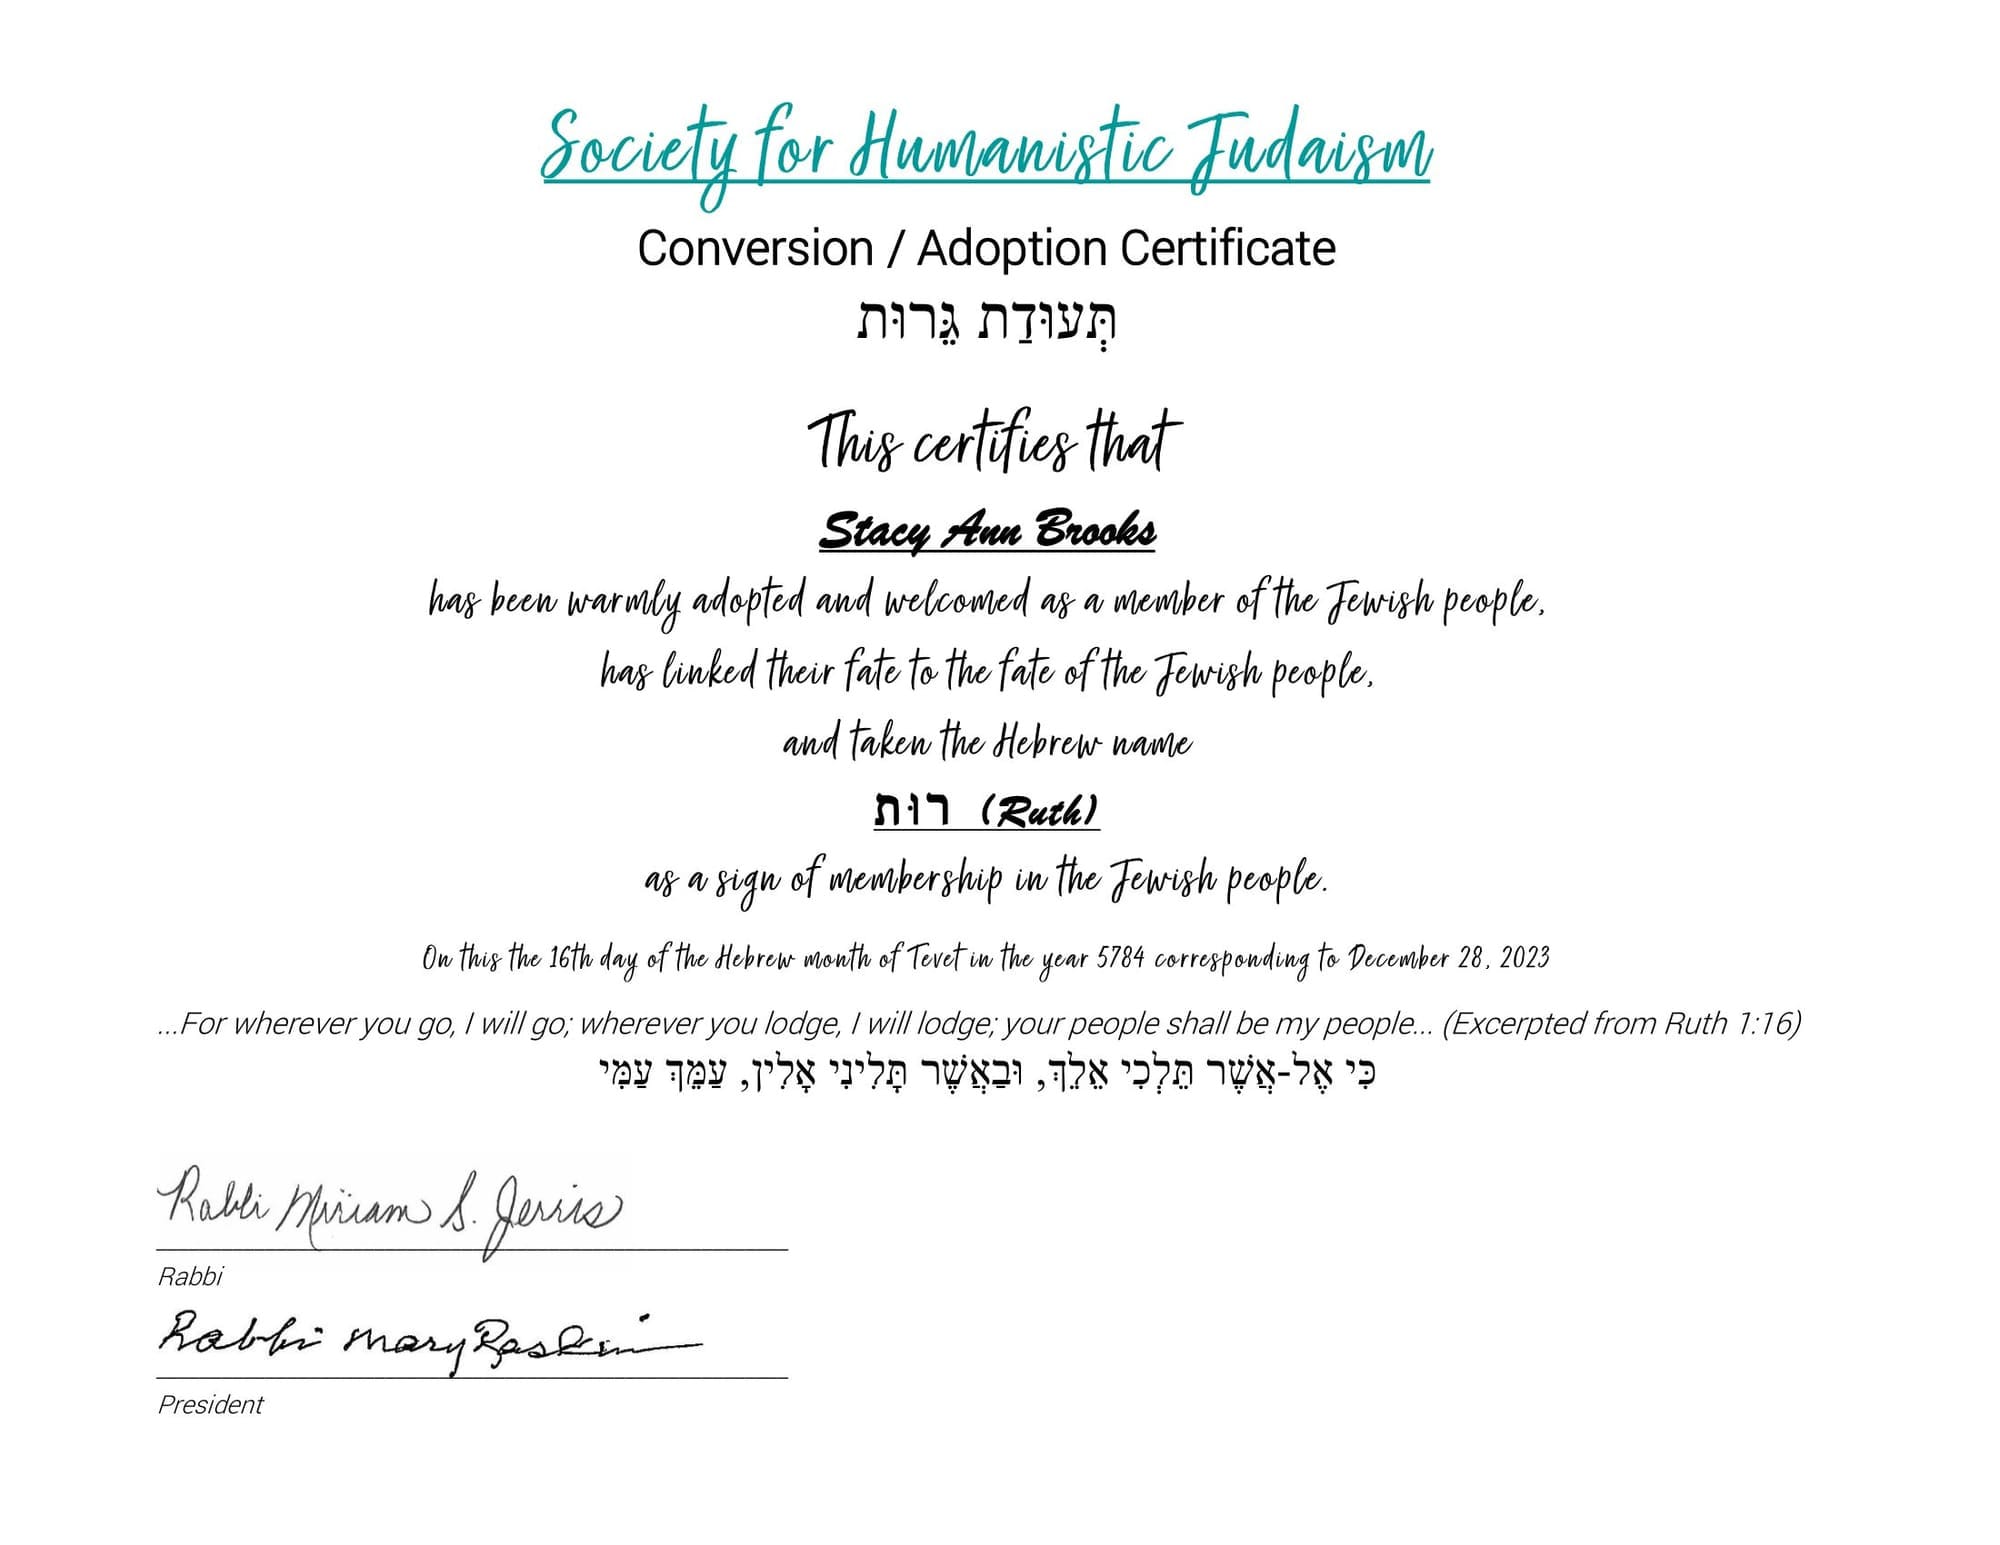 Stacy's Society for Humanistic Judaism certificate indicating that she has taken the Hebrew name Ruth